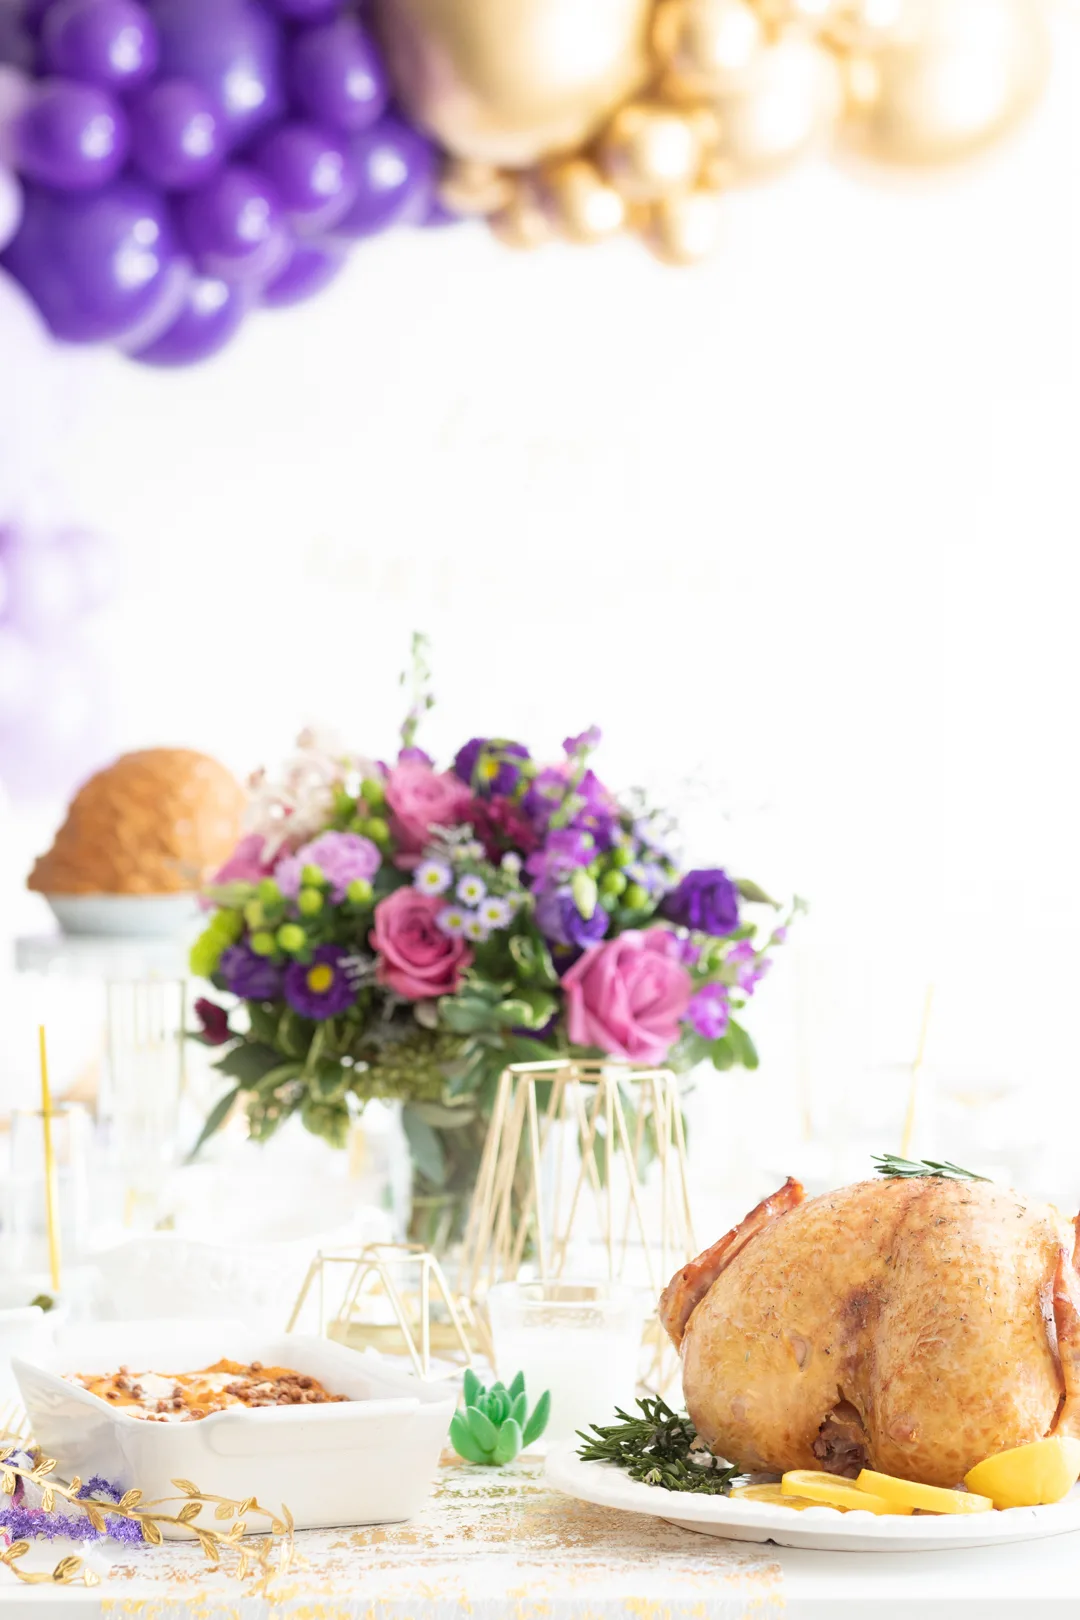 fakesgiving tablescape with traditional thanksgiving foods and trendy purple and gold theme